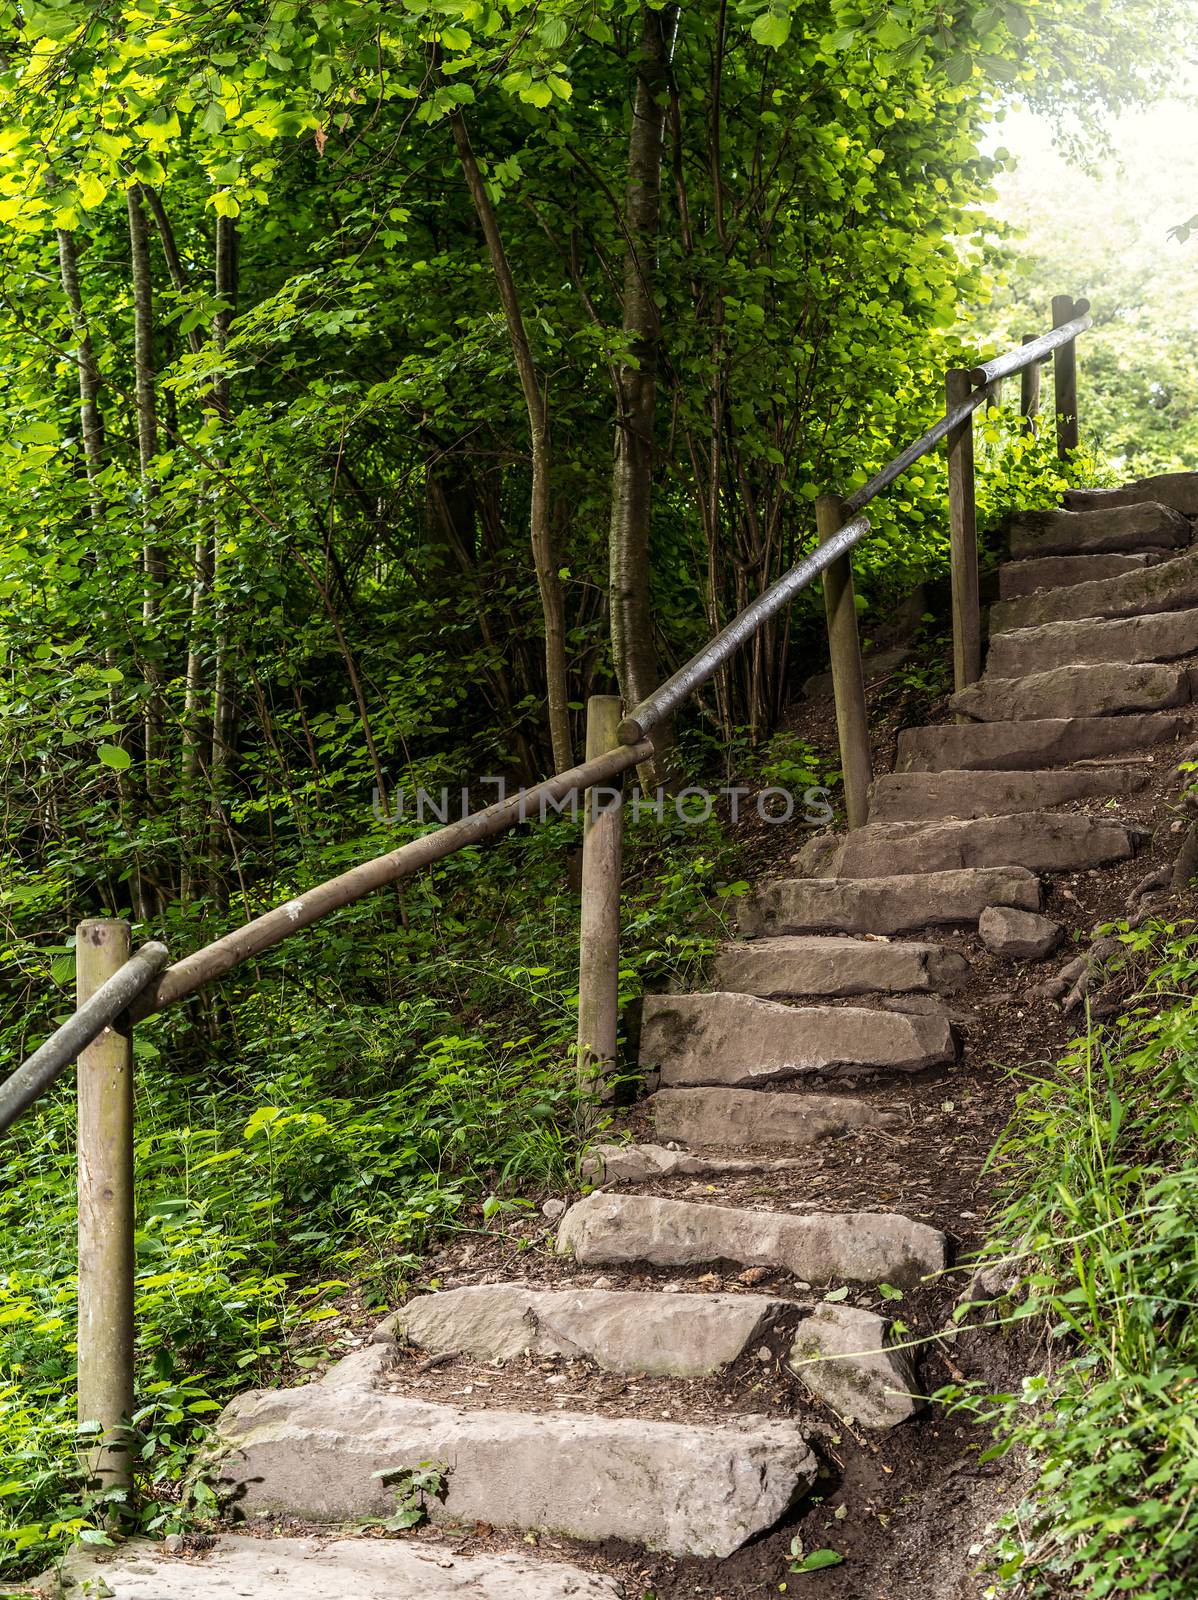 Photo of a stone staircase leading out of the forest.